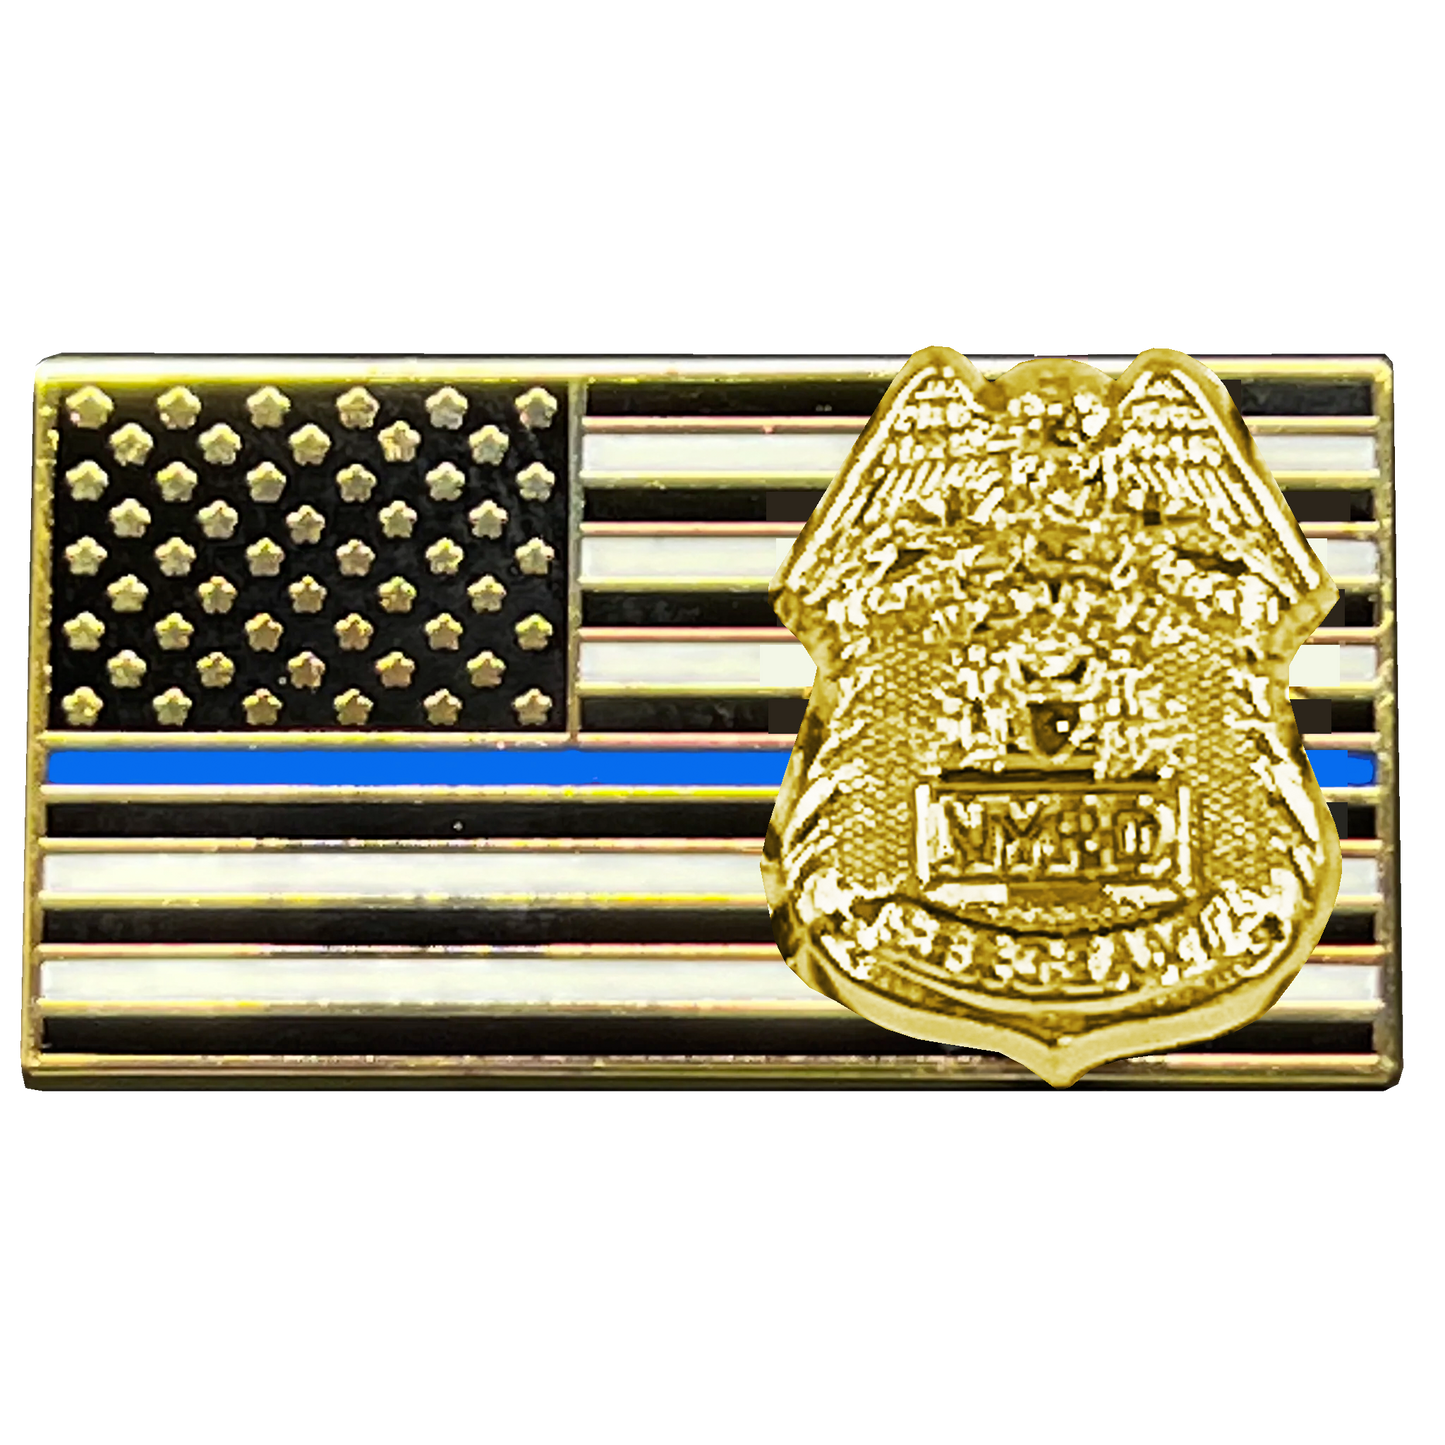 BFP-005 New York Police Department Sergeant American Flag Pin Thin Blue Line NYPD SGT